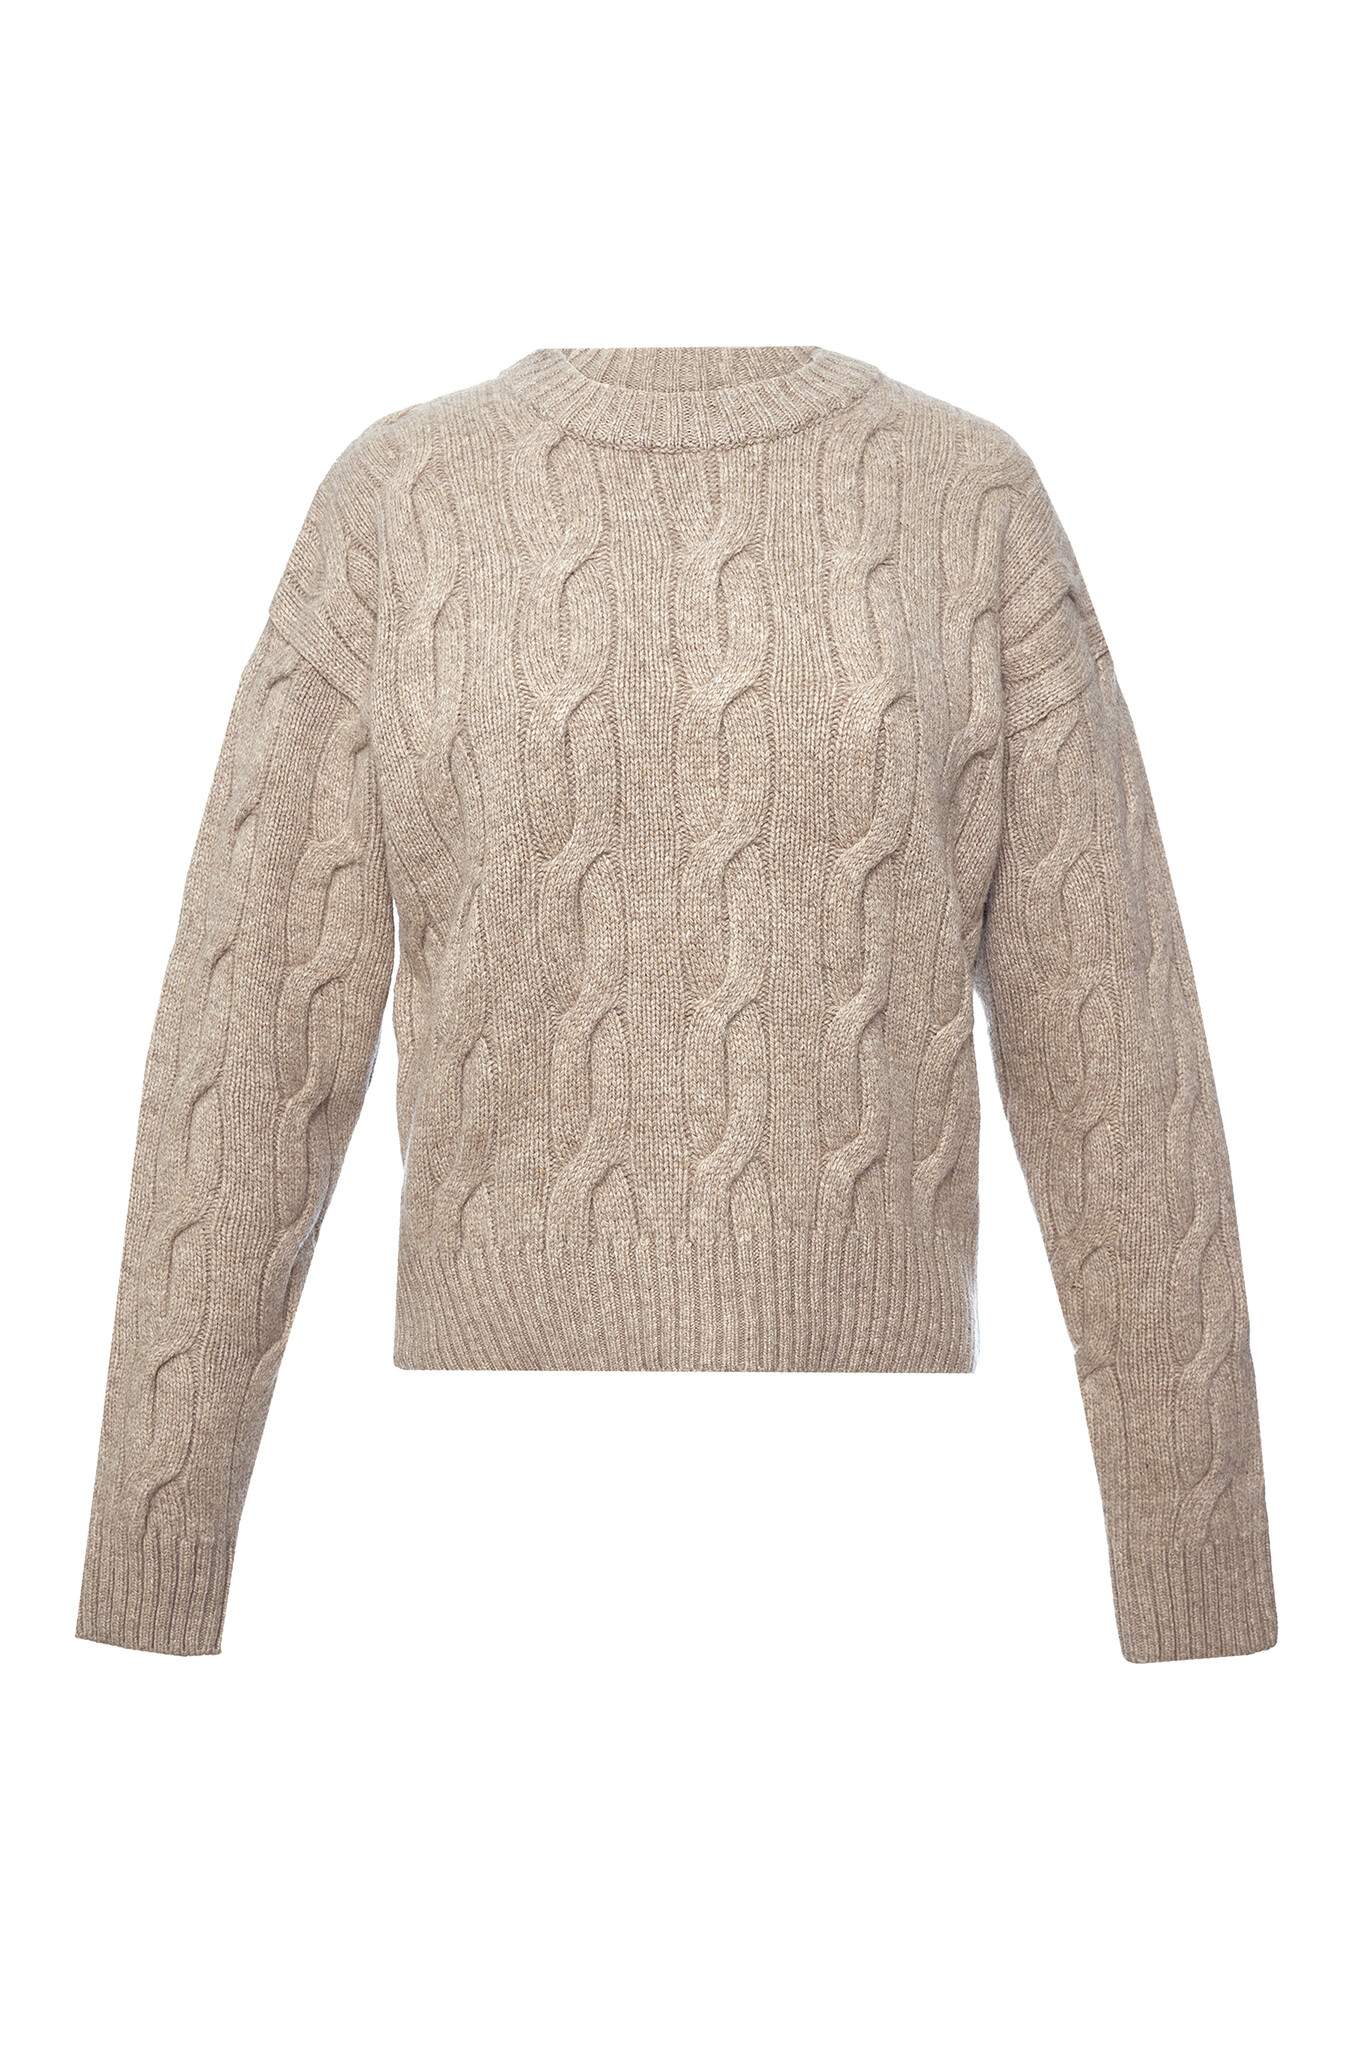 Lass Cable Knit in Beige-1